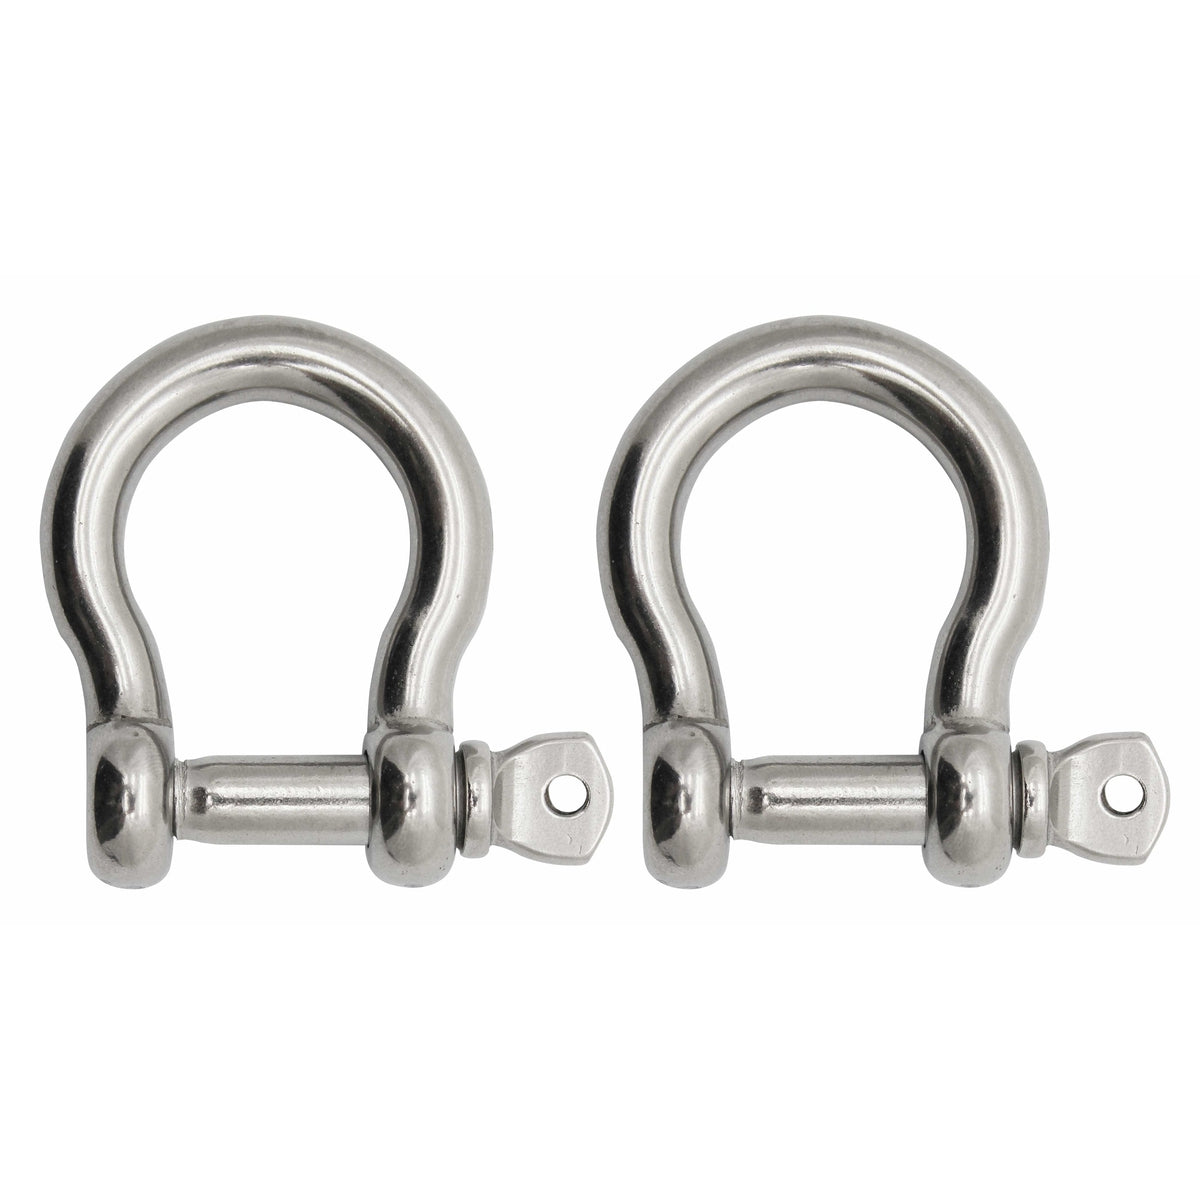 Extreme Max BoatTector SS Bow Shackle 1/2" 2-pk #3006.8297.2